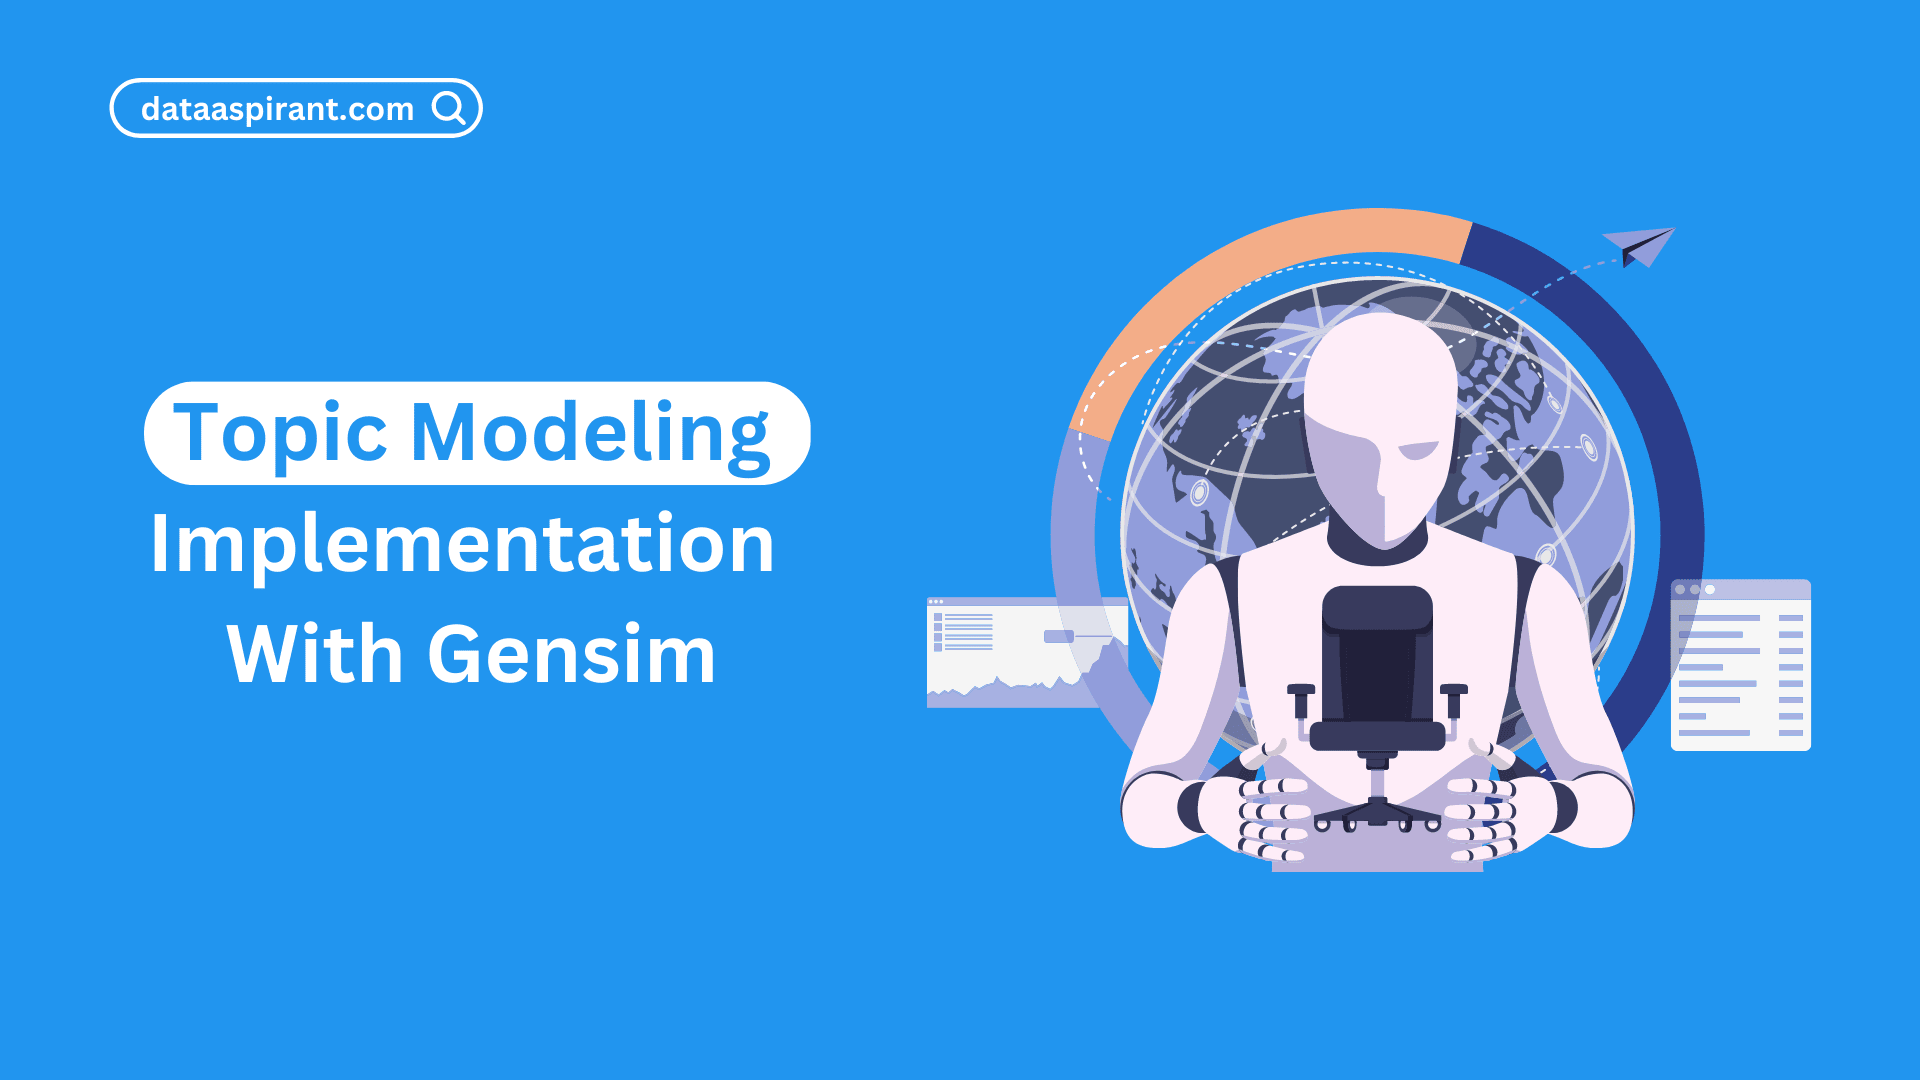 Topic Modeling Implementation with Gensim